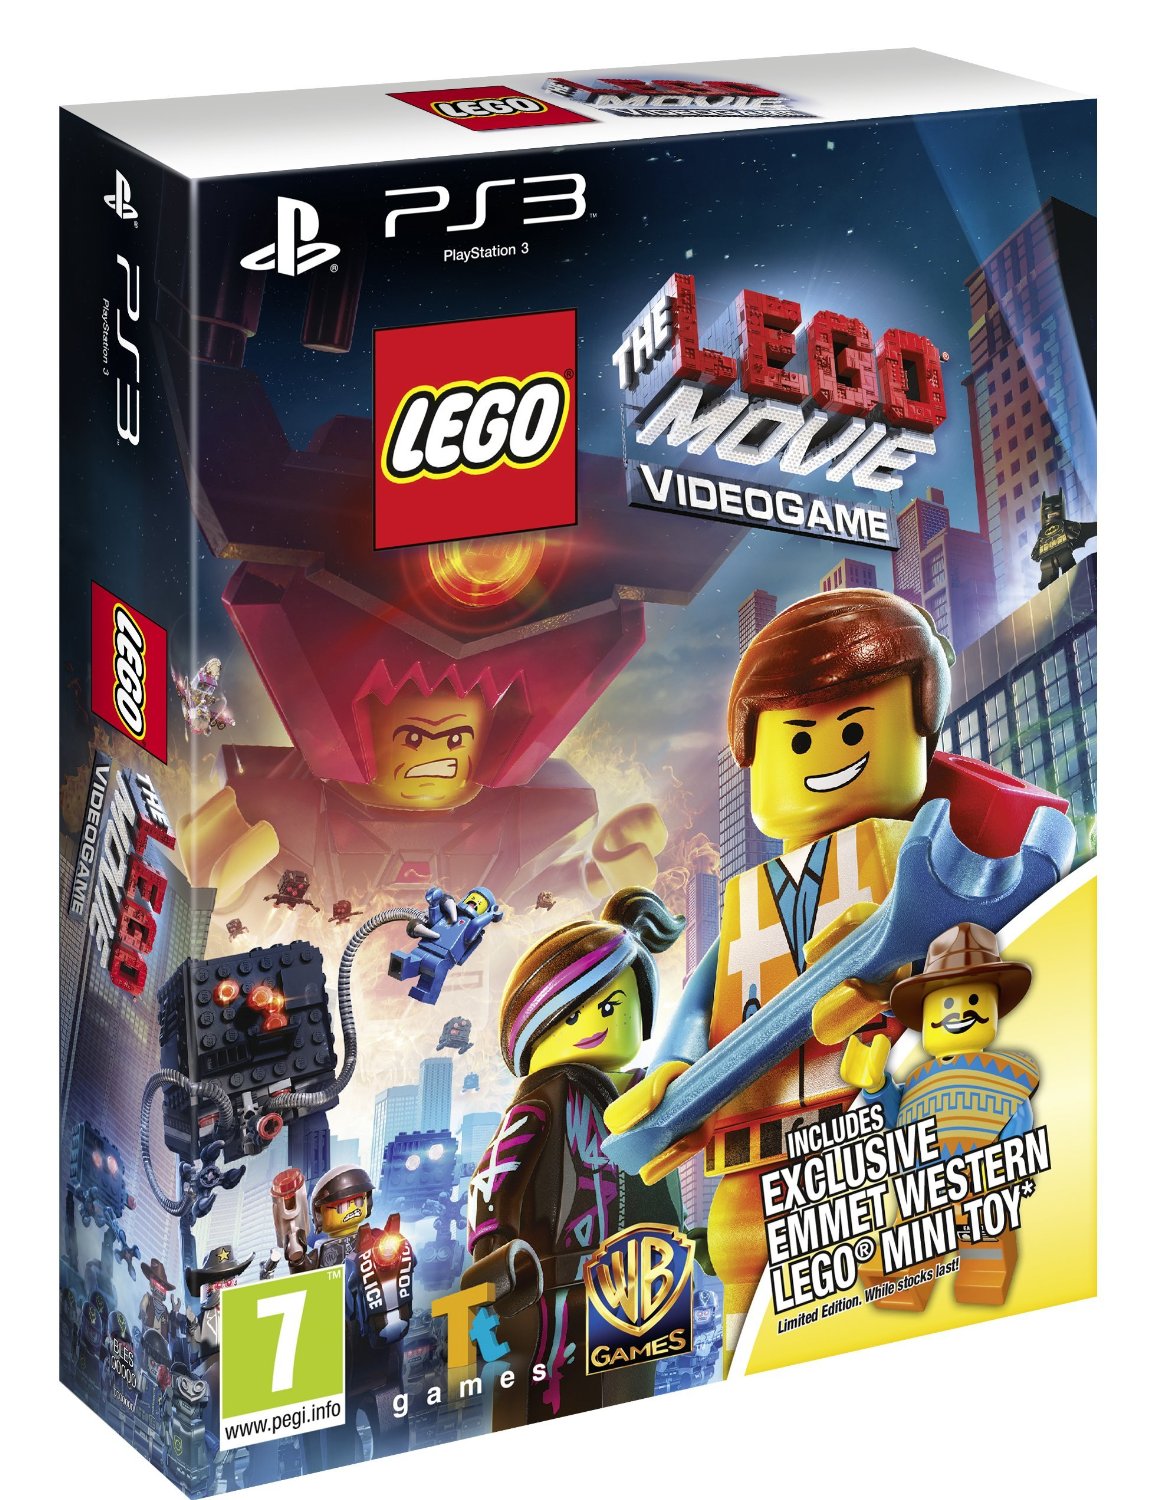 The LEGO Movie Videogame Western Emmet Minitoy Edition (PS3)